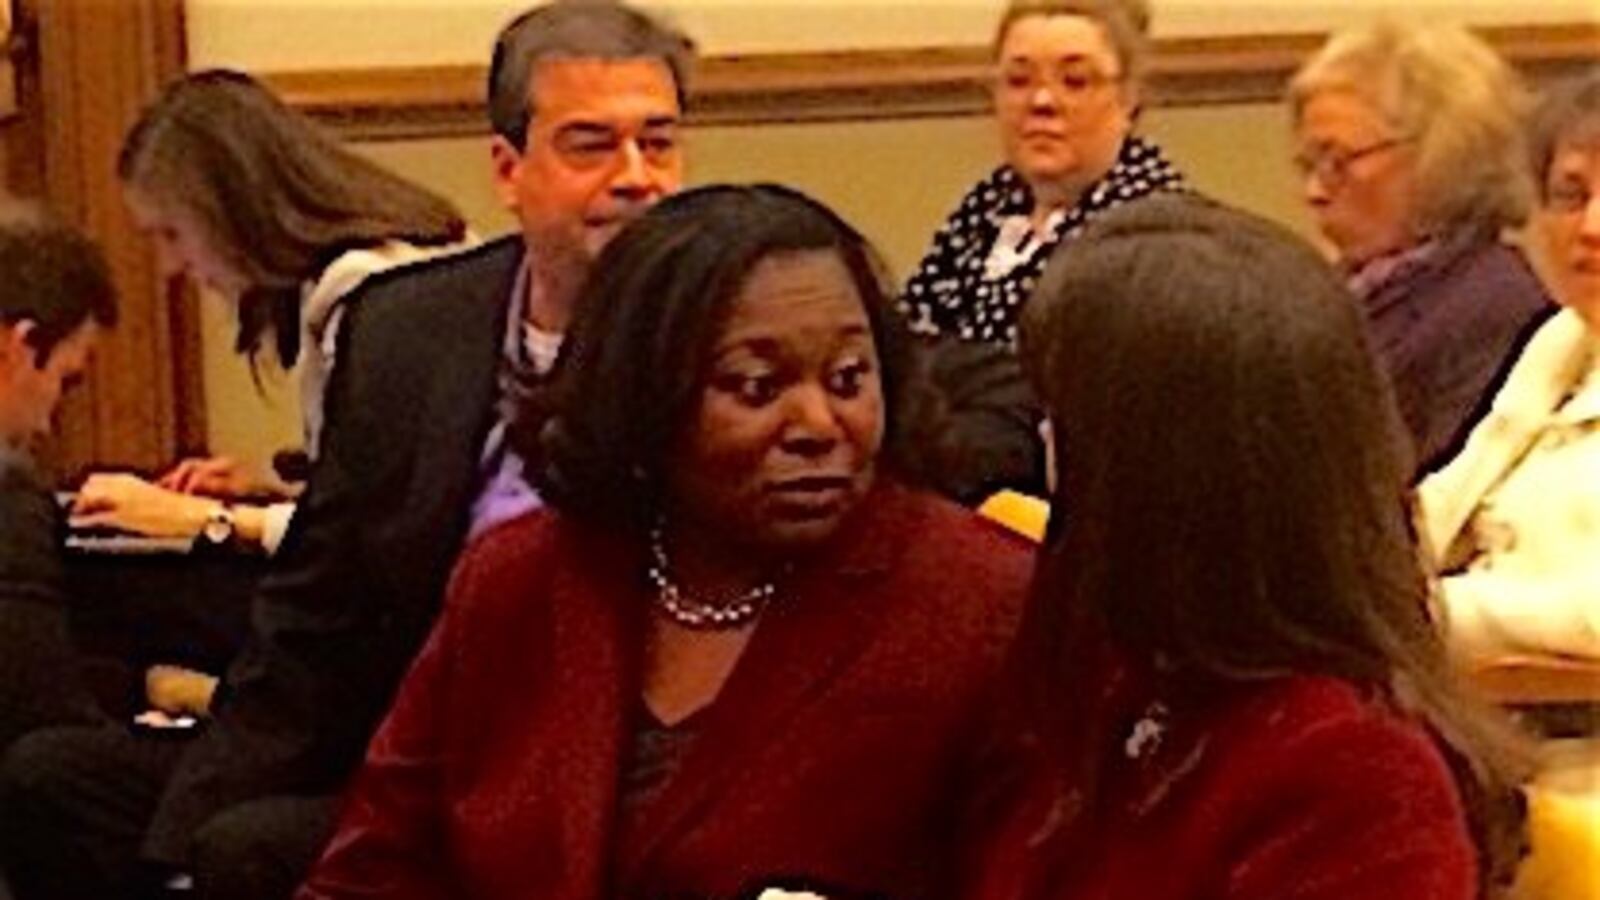 Tennessee Assistant Education Commissioner Nakia Towns confers with Education Commissioner Candice McQueen on Wednesday before appearing before a state Senate hearing about TNReady.